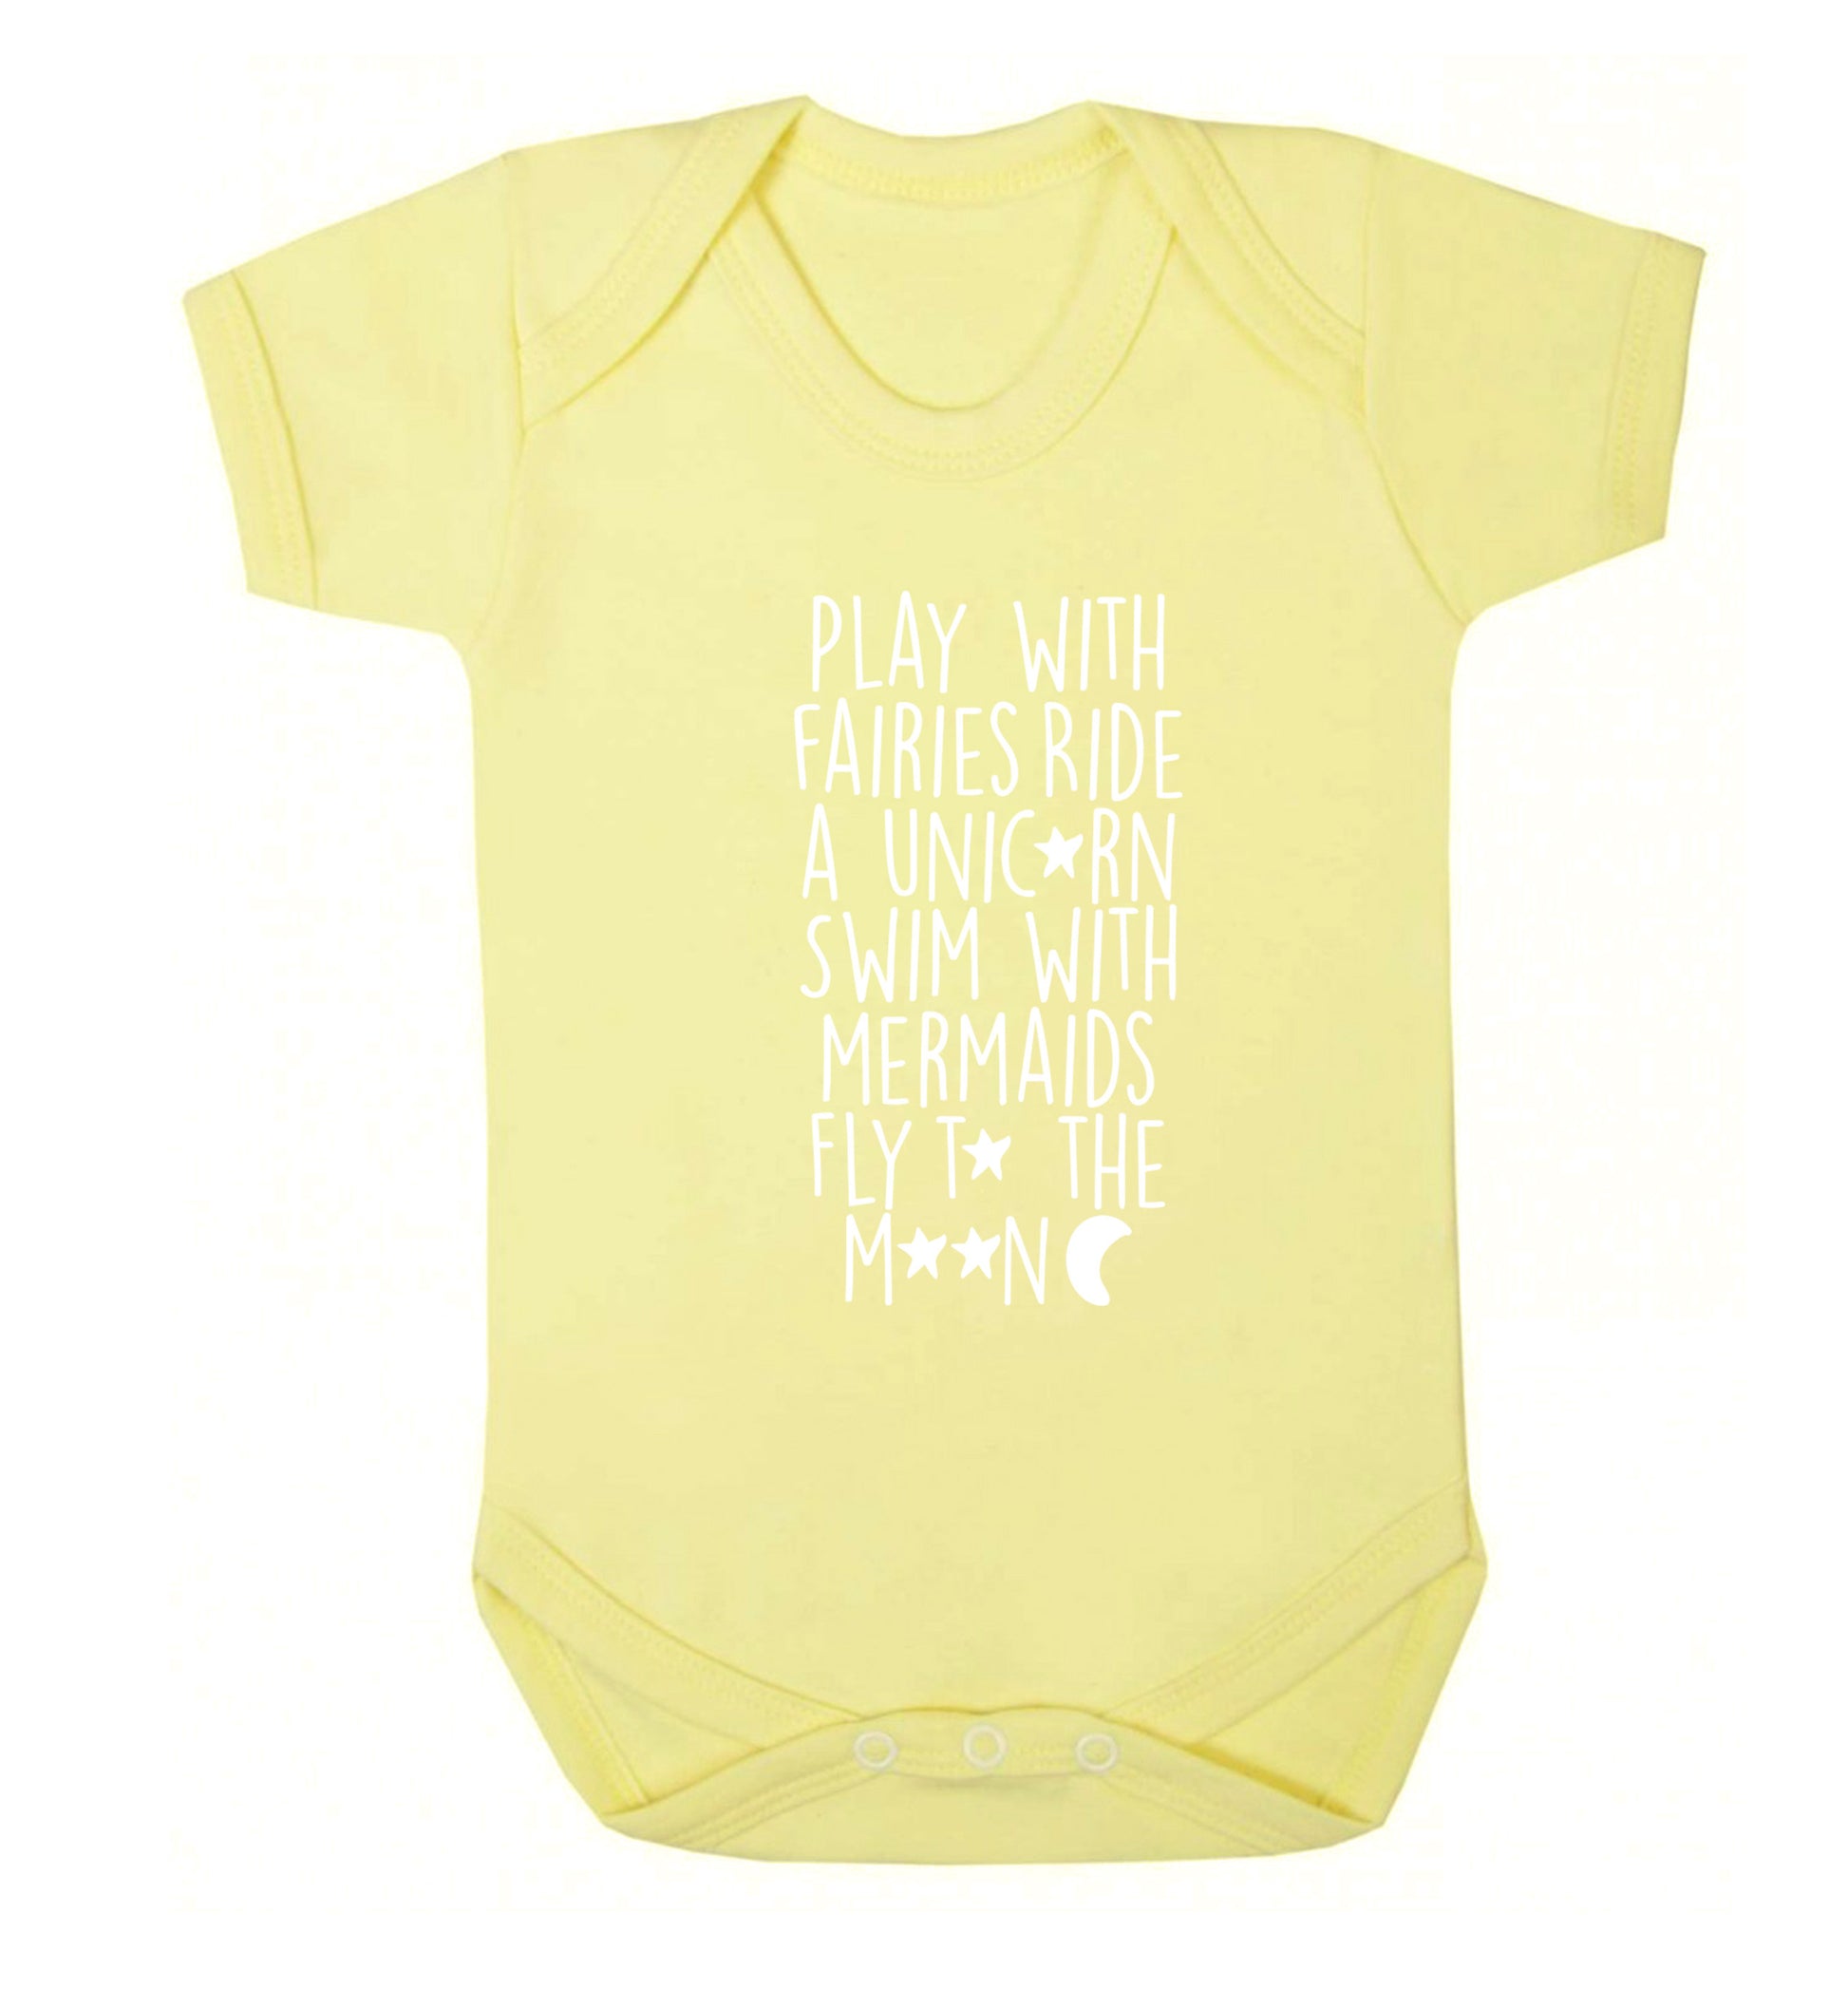 Play with fairies ride a unicorn swim with mermaids fly to the moon Baby Vest pale yellow 18-24 months